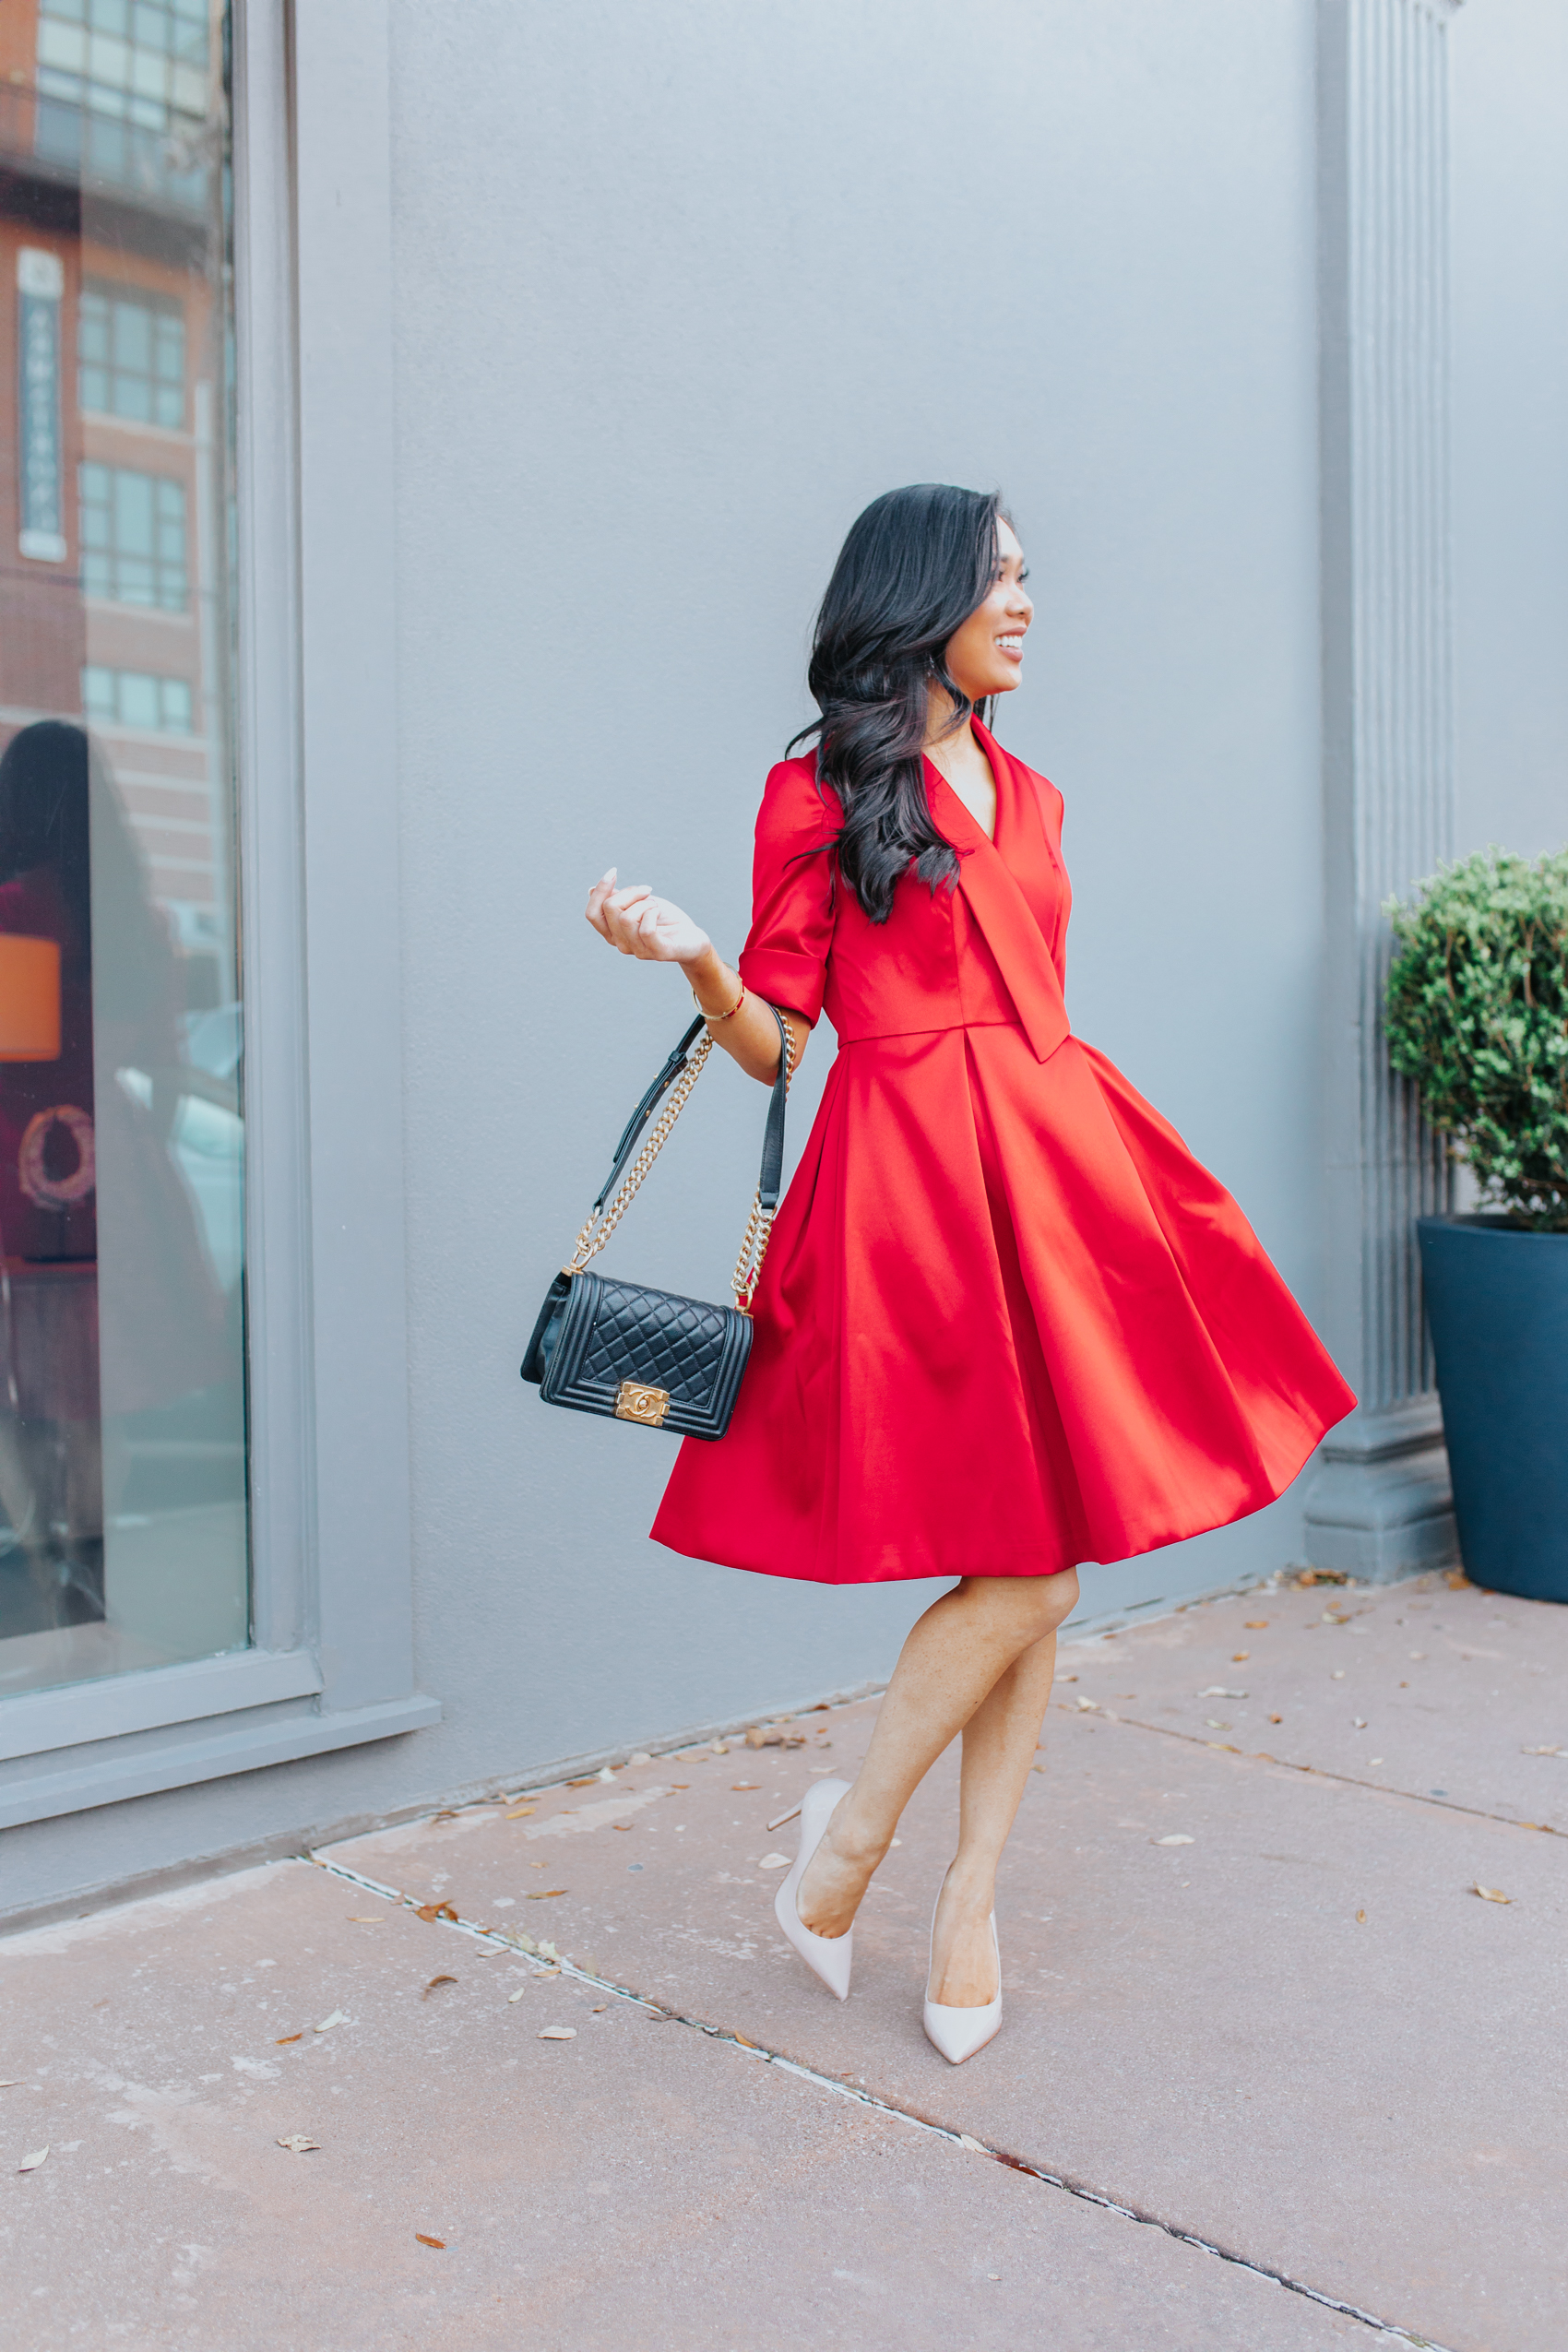 Blogger Hoang-Kim wears a red dress with an oversized lapel